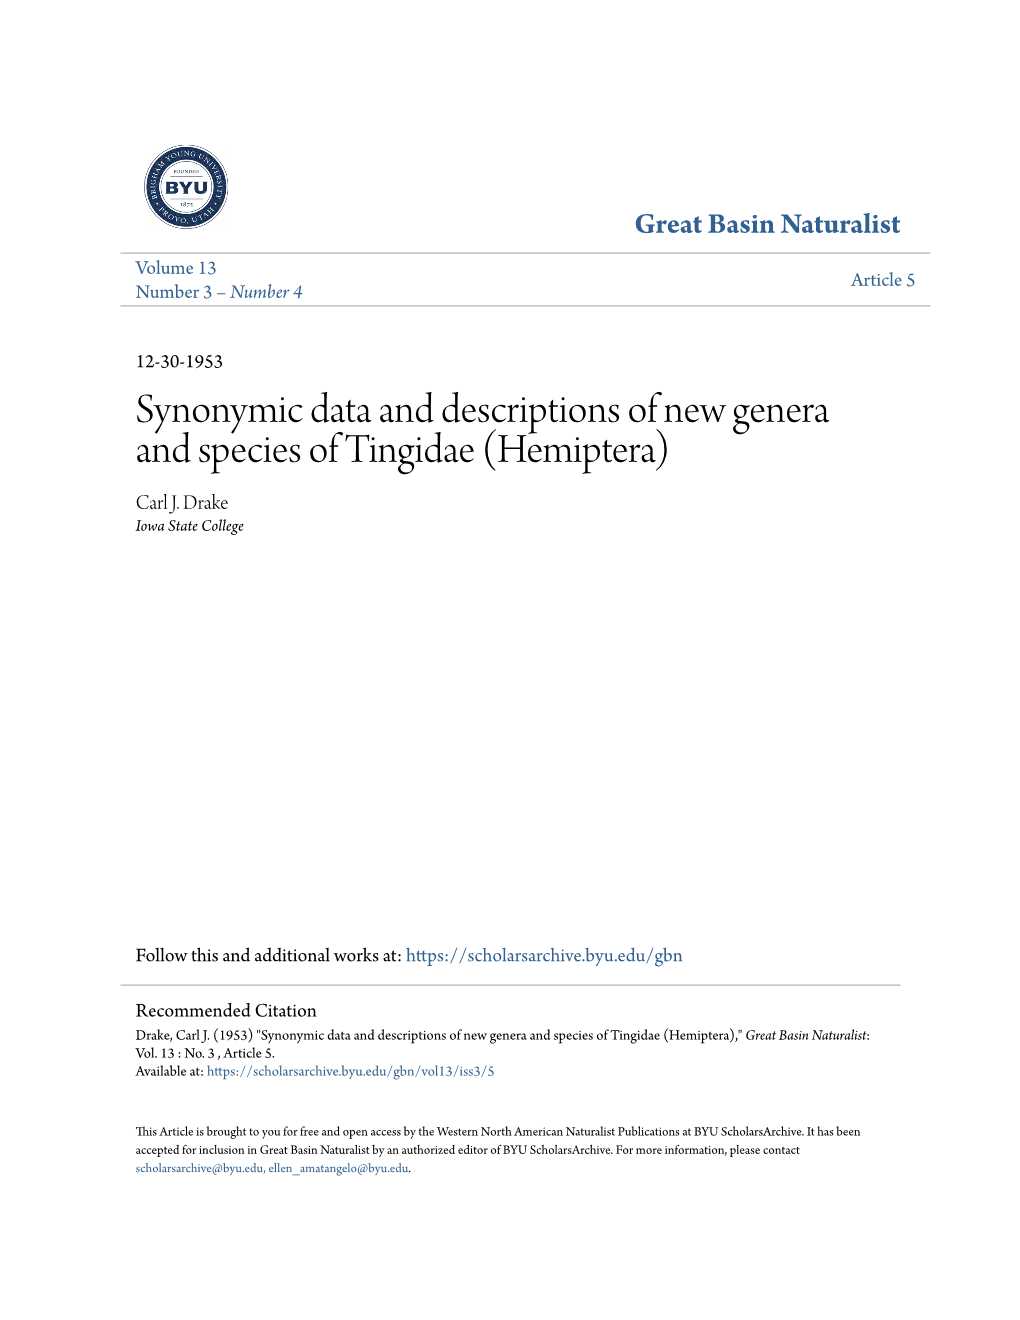 Synonymic Data and Descriptions of New Genera and Species of Tingidae (Hemiptera) Carl J